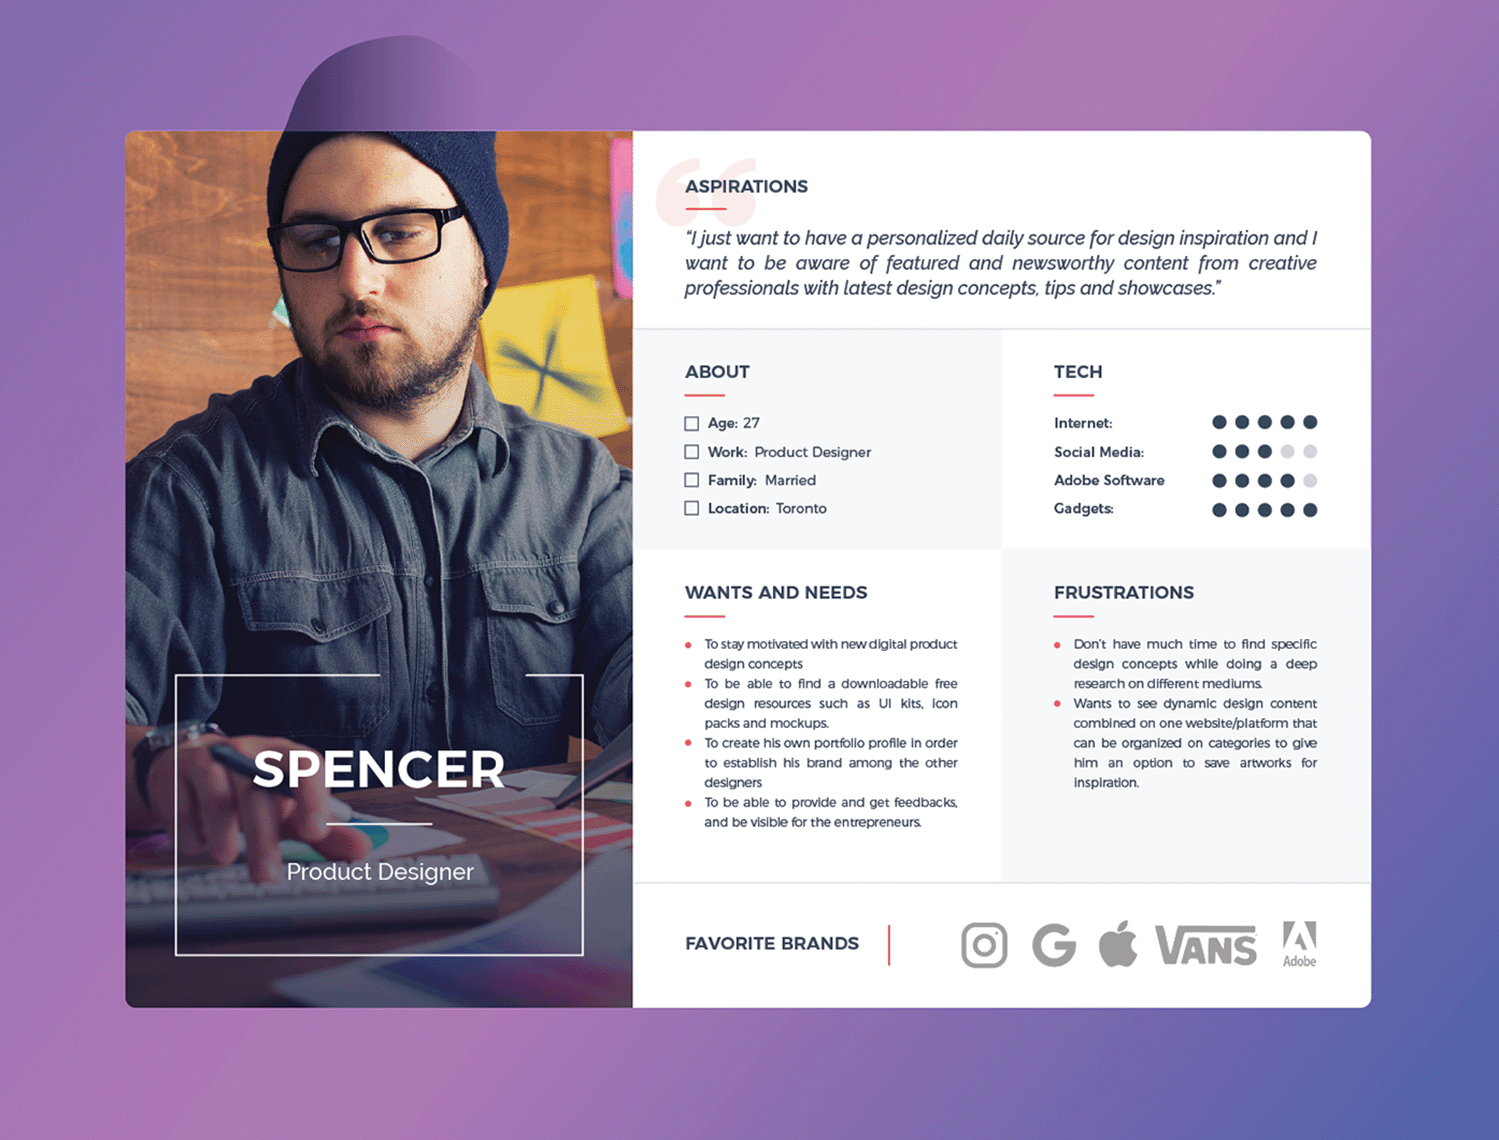 Product Designer's persona template highlights his need for inspiration, efficient tools, and a platform for his designs, addressing the typical challenges faced by busy designers.